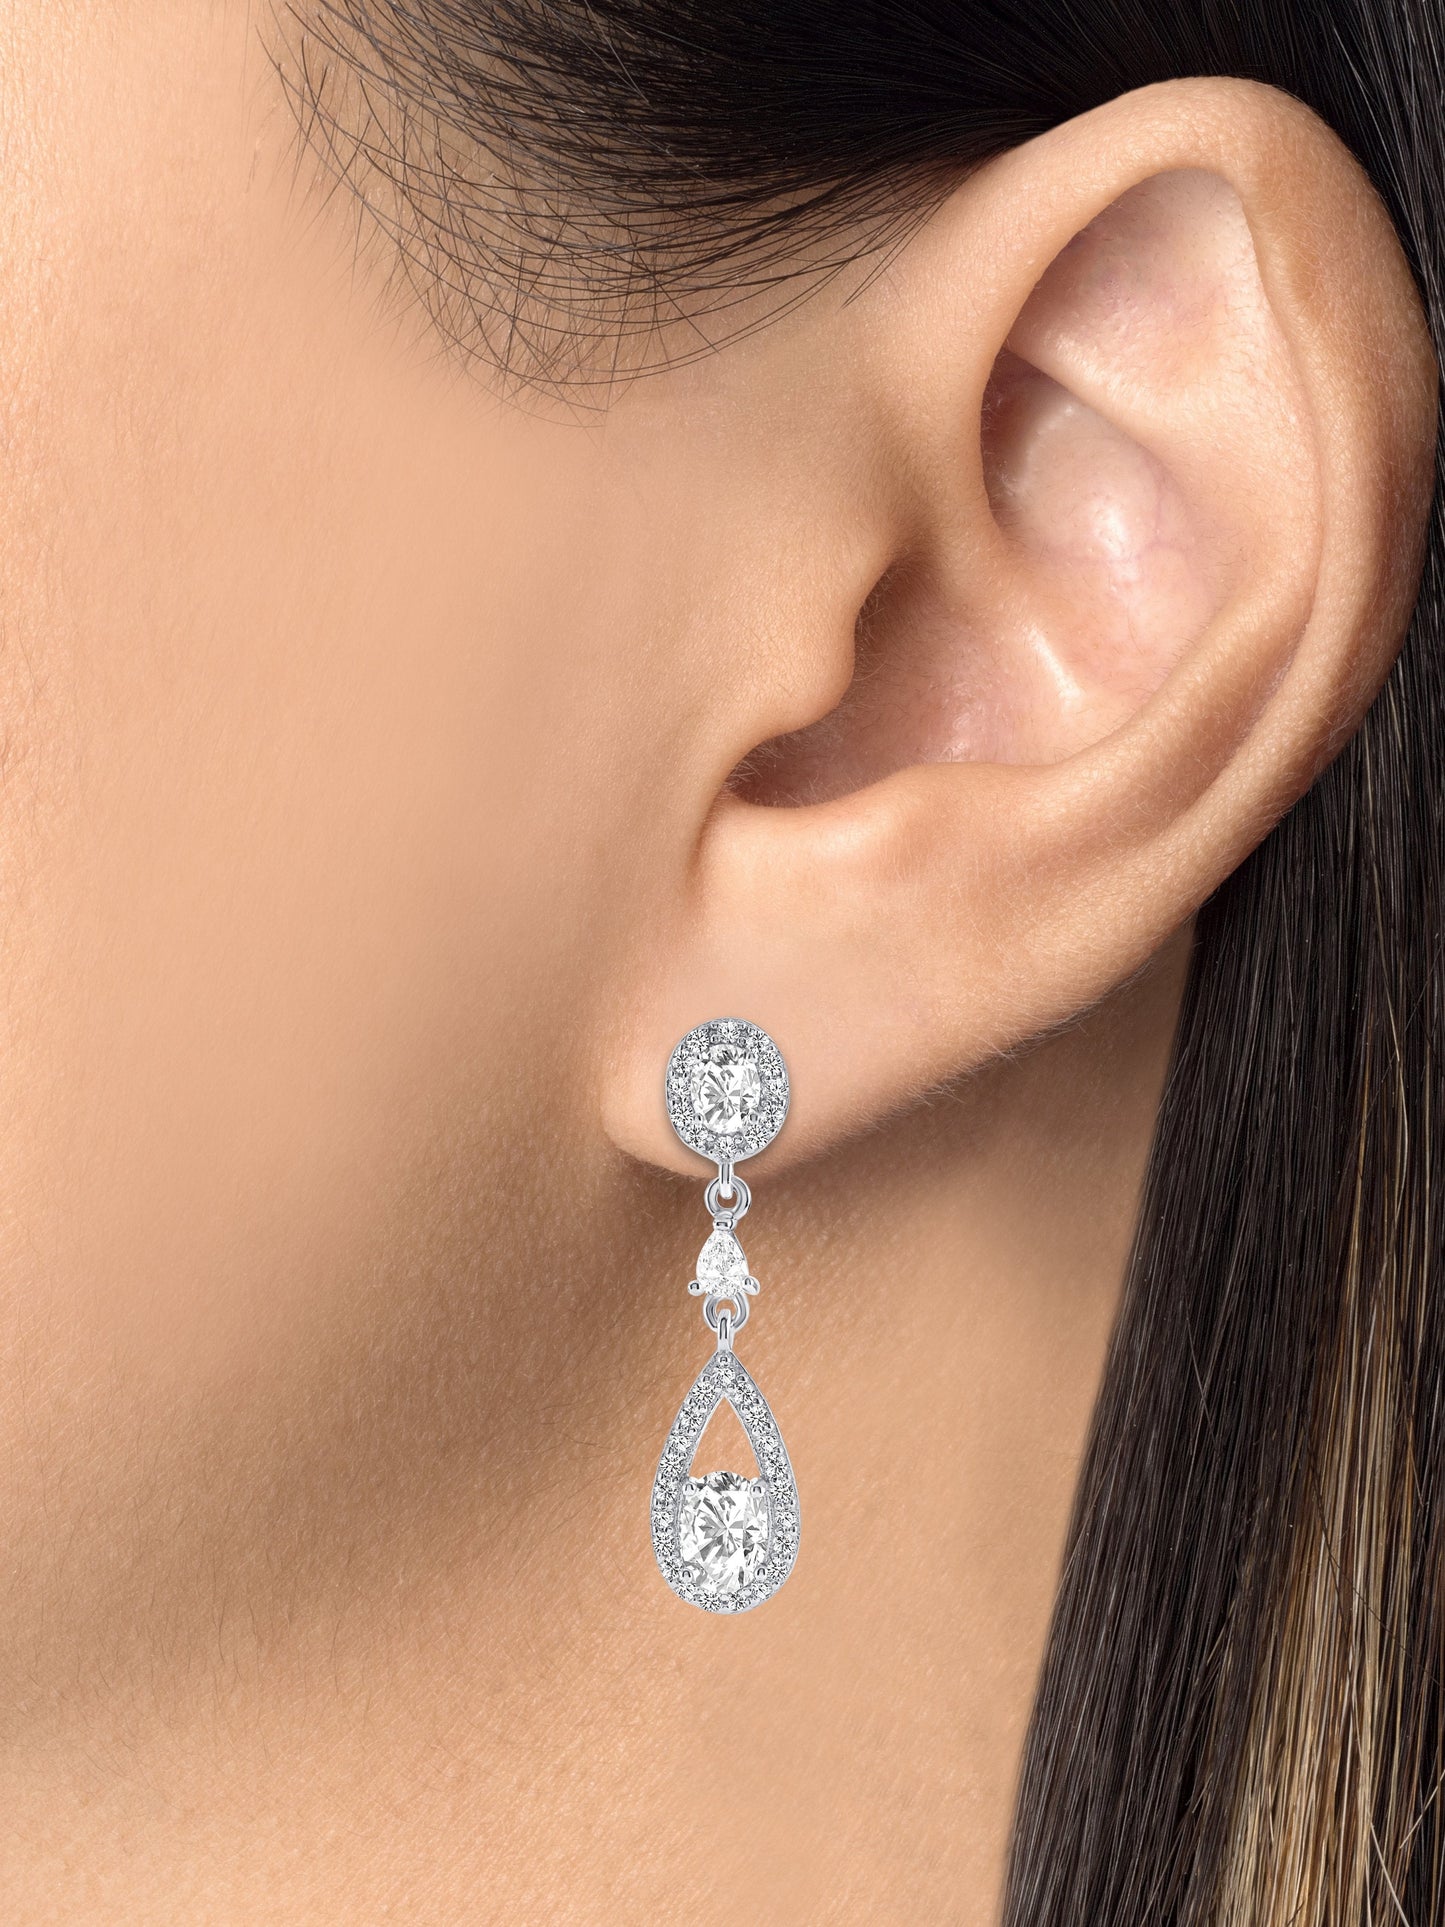 Silver 925 Rhodium Plated Dangling Clear Cubic Zirconia Earrings. DGE1008CLR